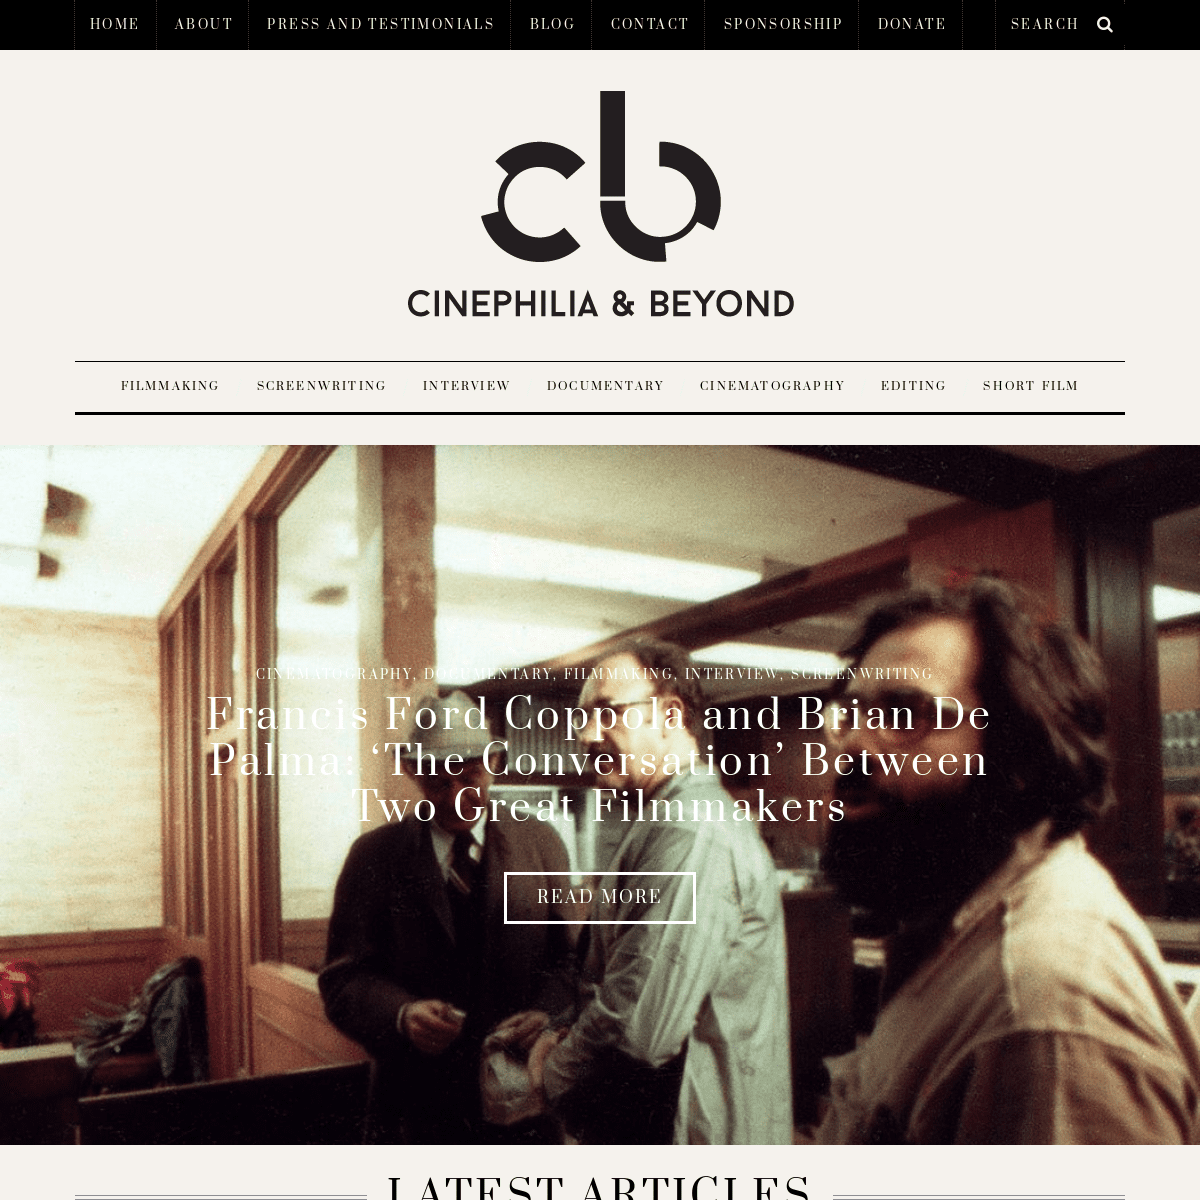 Cinephilia & Beyond, Films and Filmmaking